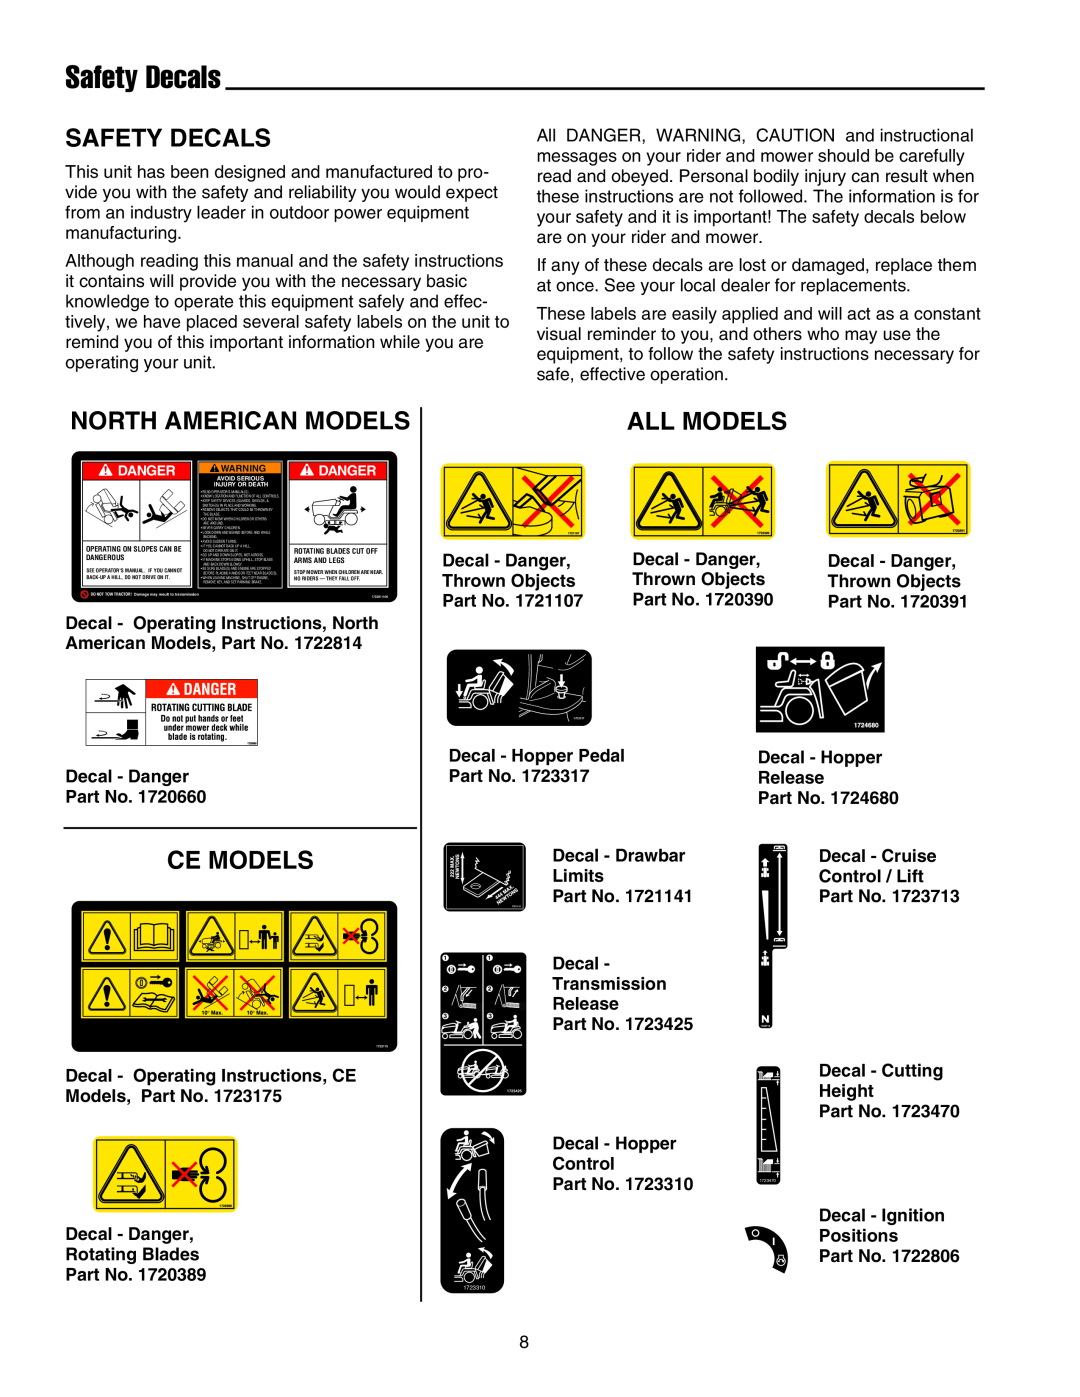 Snapper XL Series manual Safety Decals, North American Models, All Models, Ce Models 